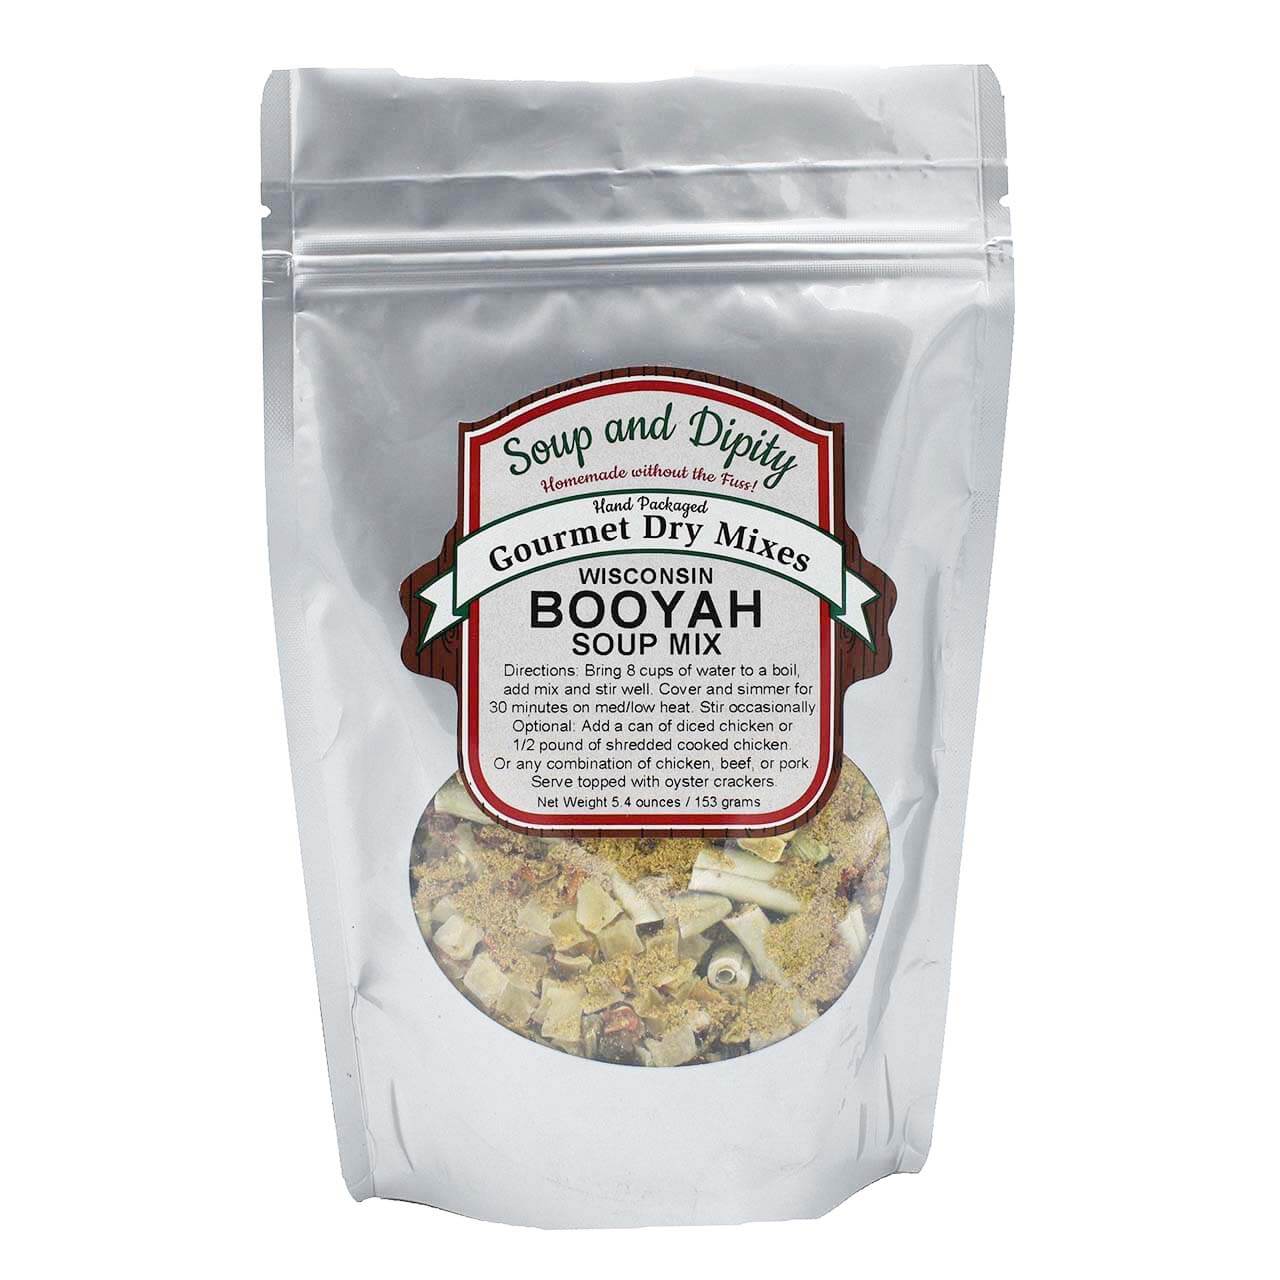 Wisconsin Booyah Soup Mix